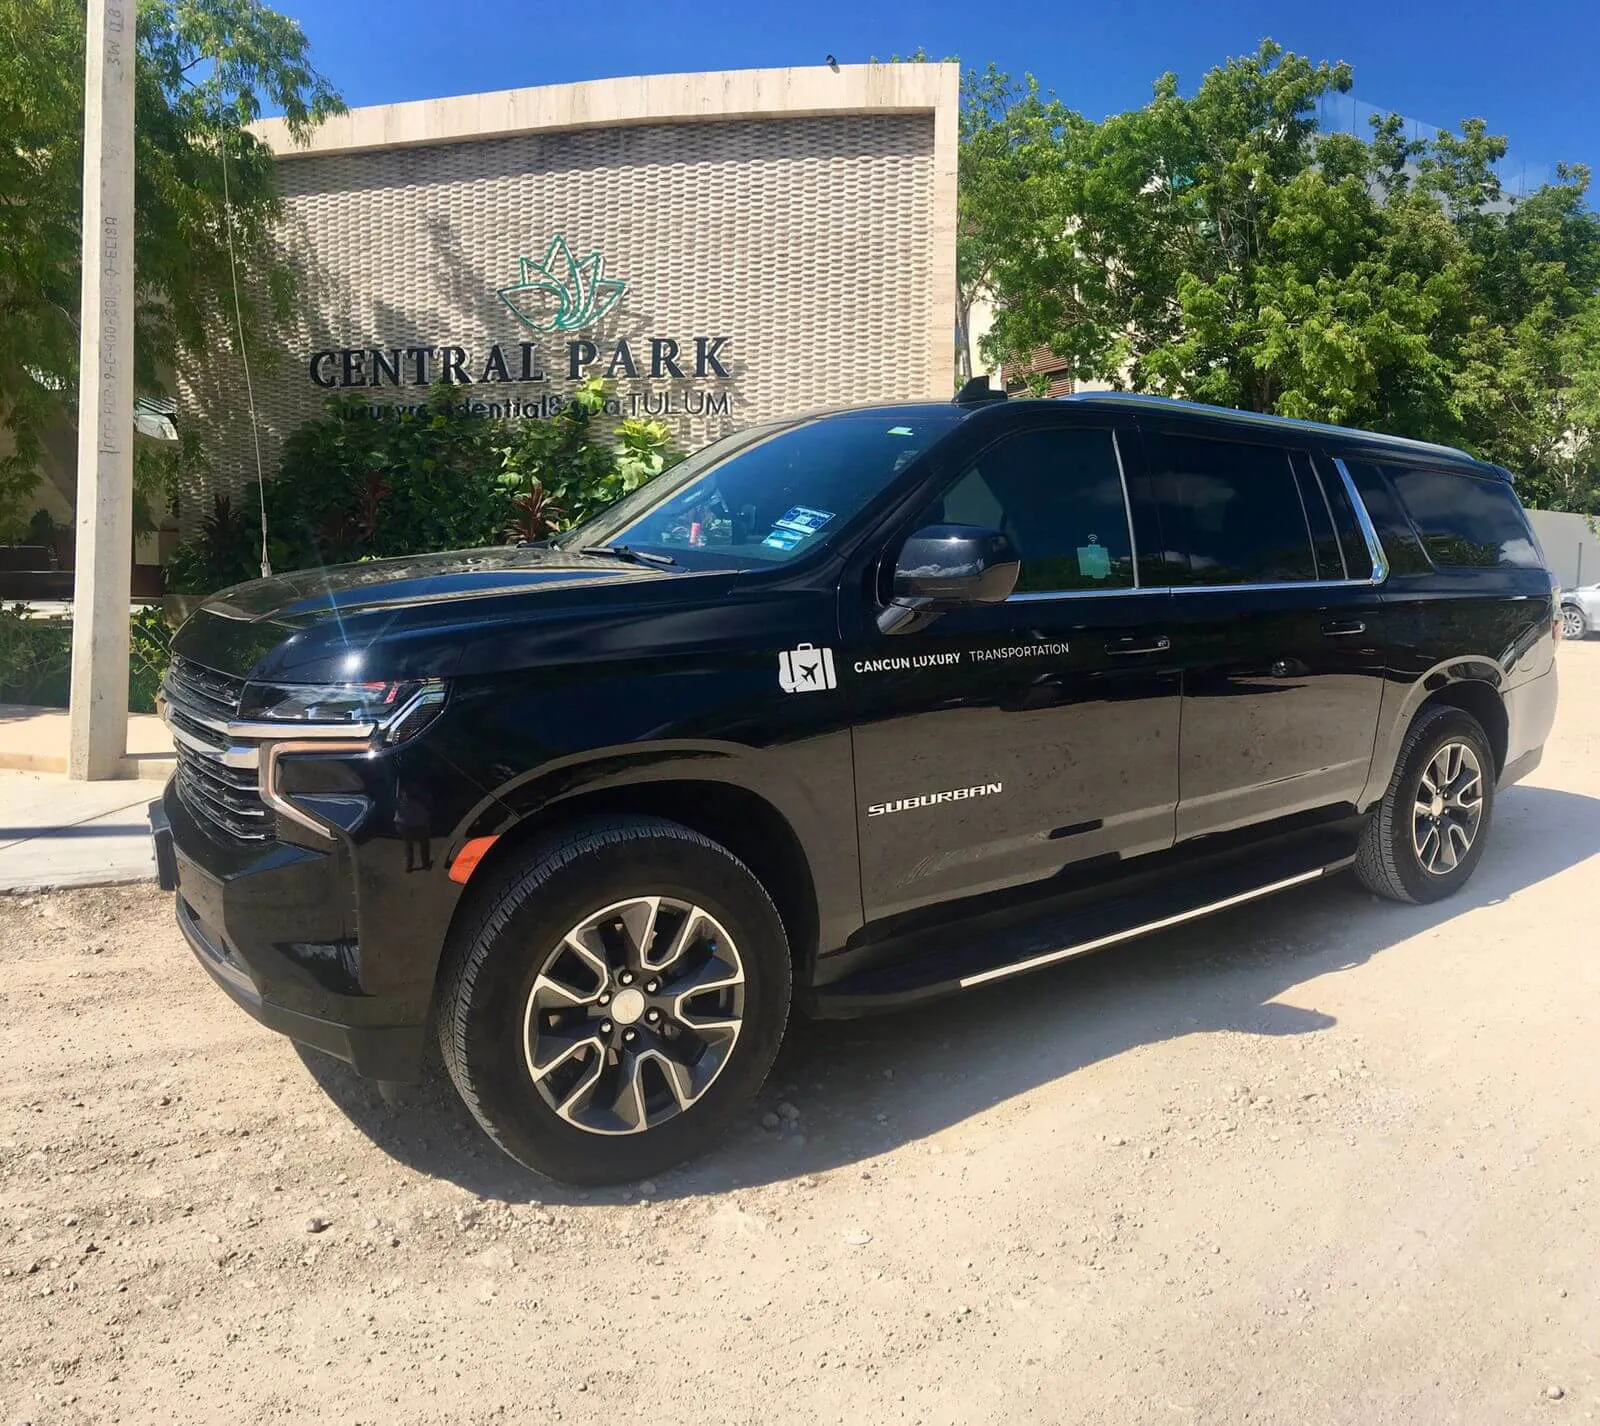 Black Surbuban 2021 parked in front of Central Park Tulum sign 